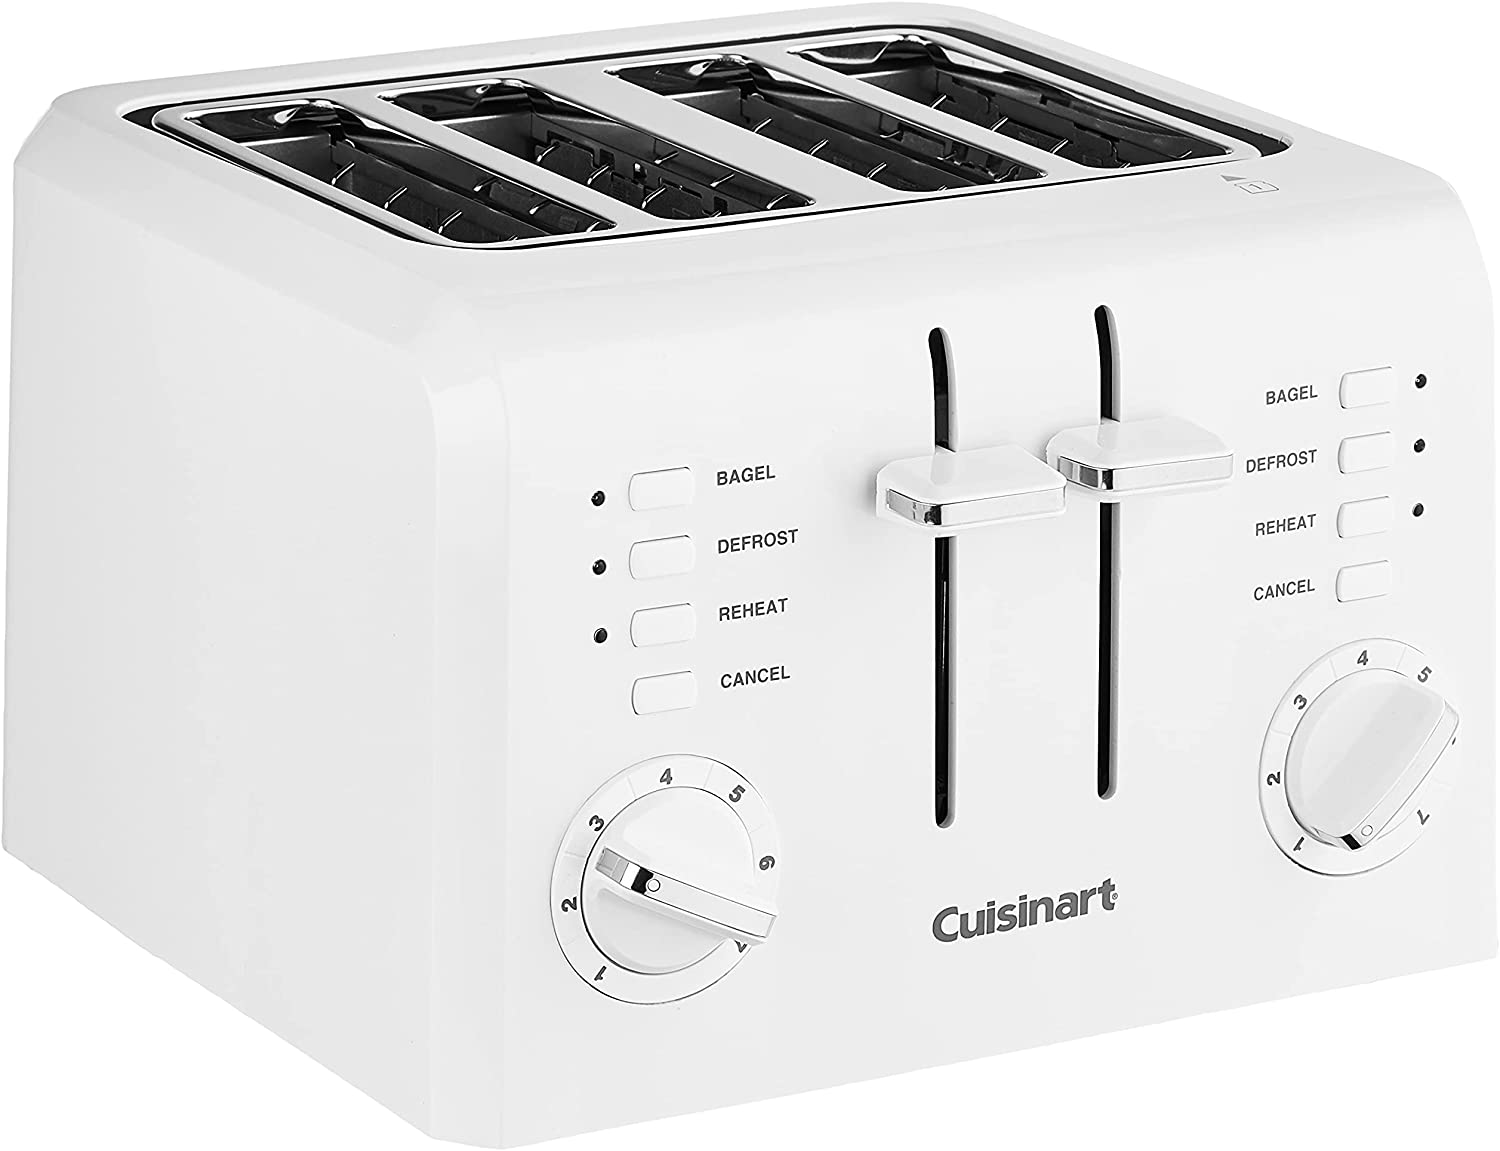 Cuisinart CPT-142FR Plastic 4 Slices Toaster White - Certified Refurbished